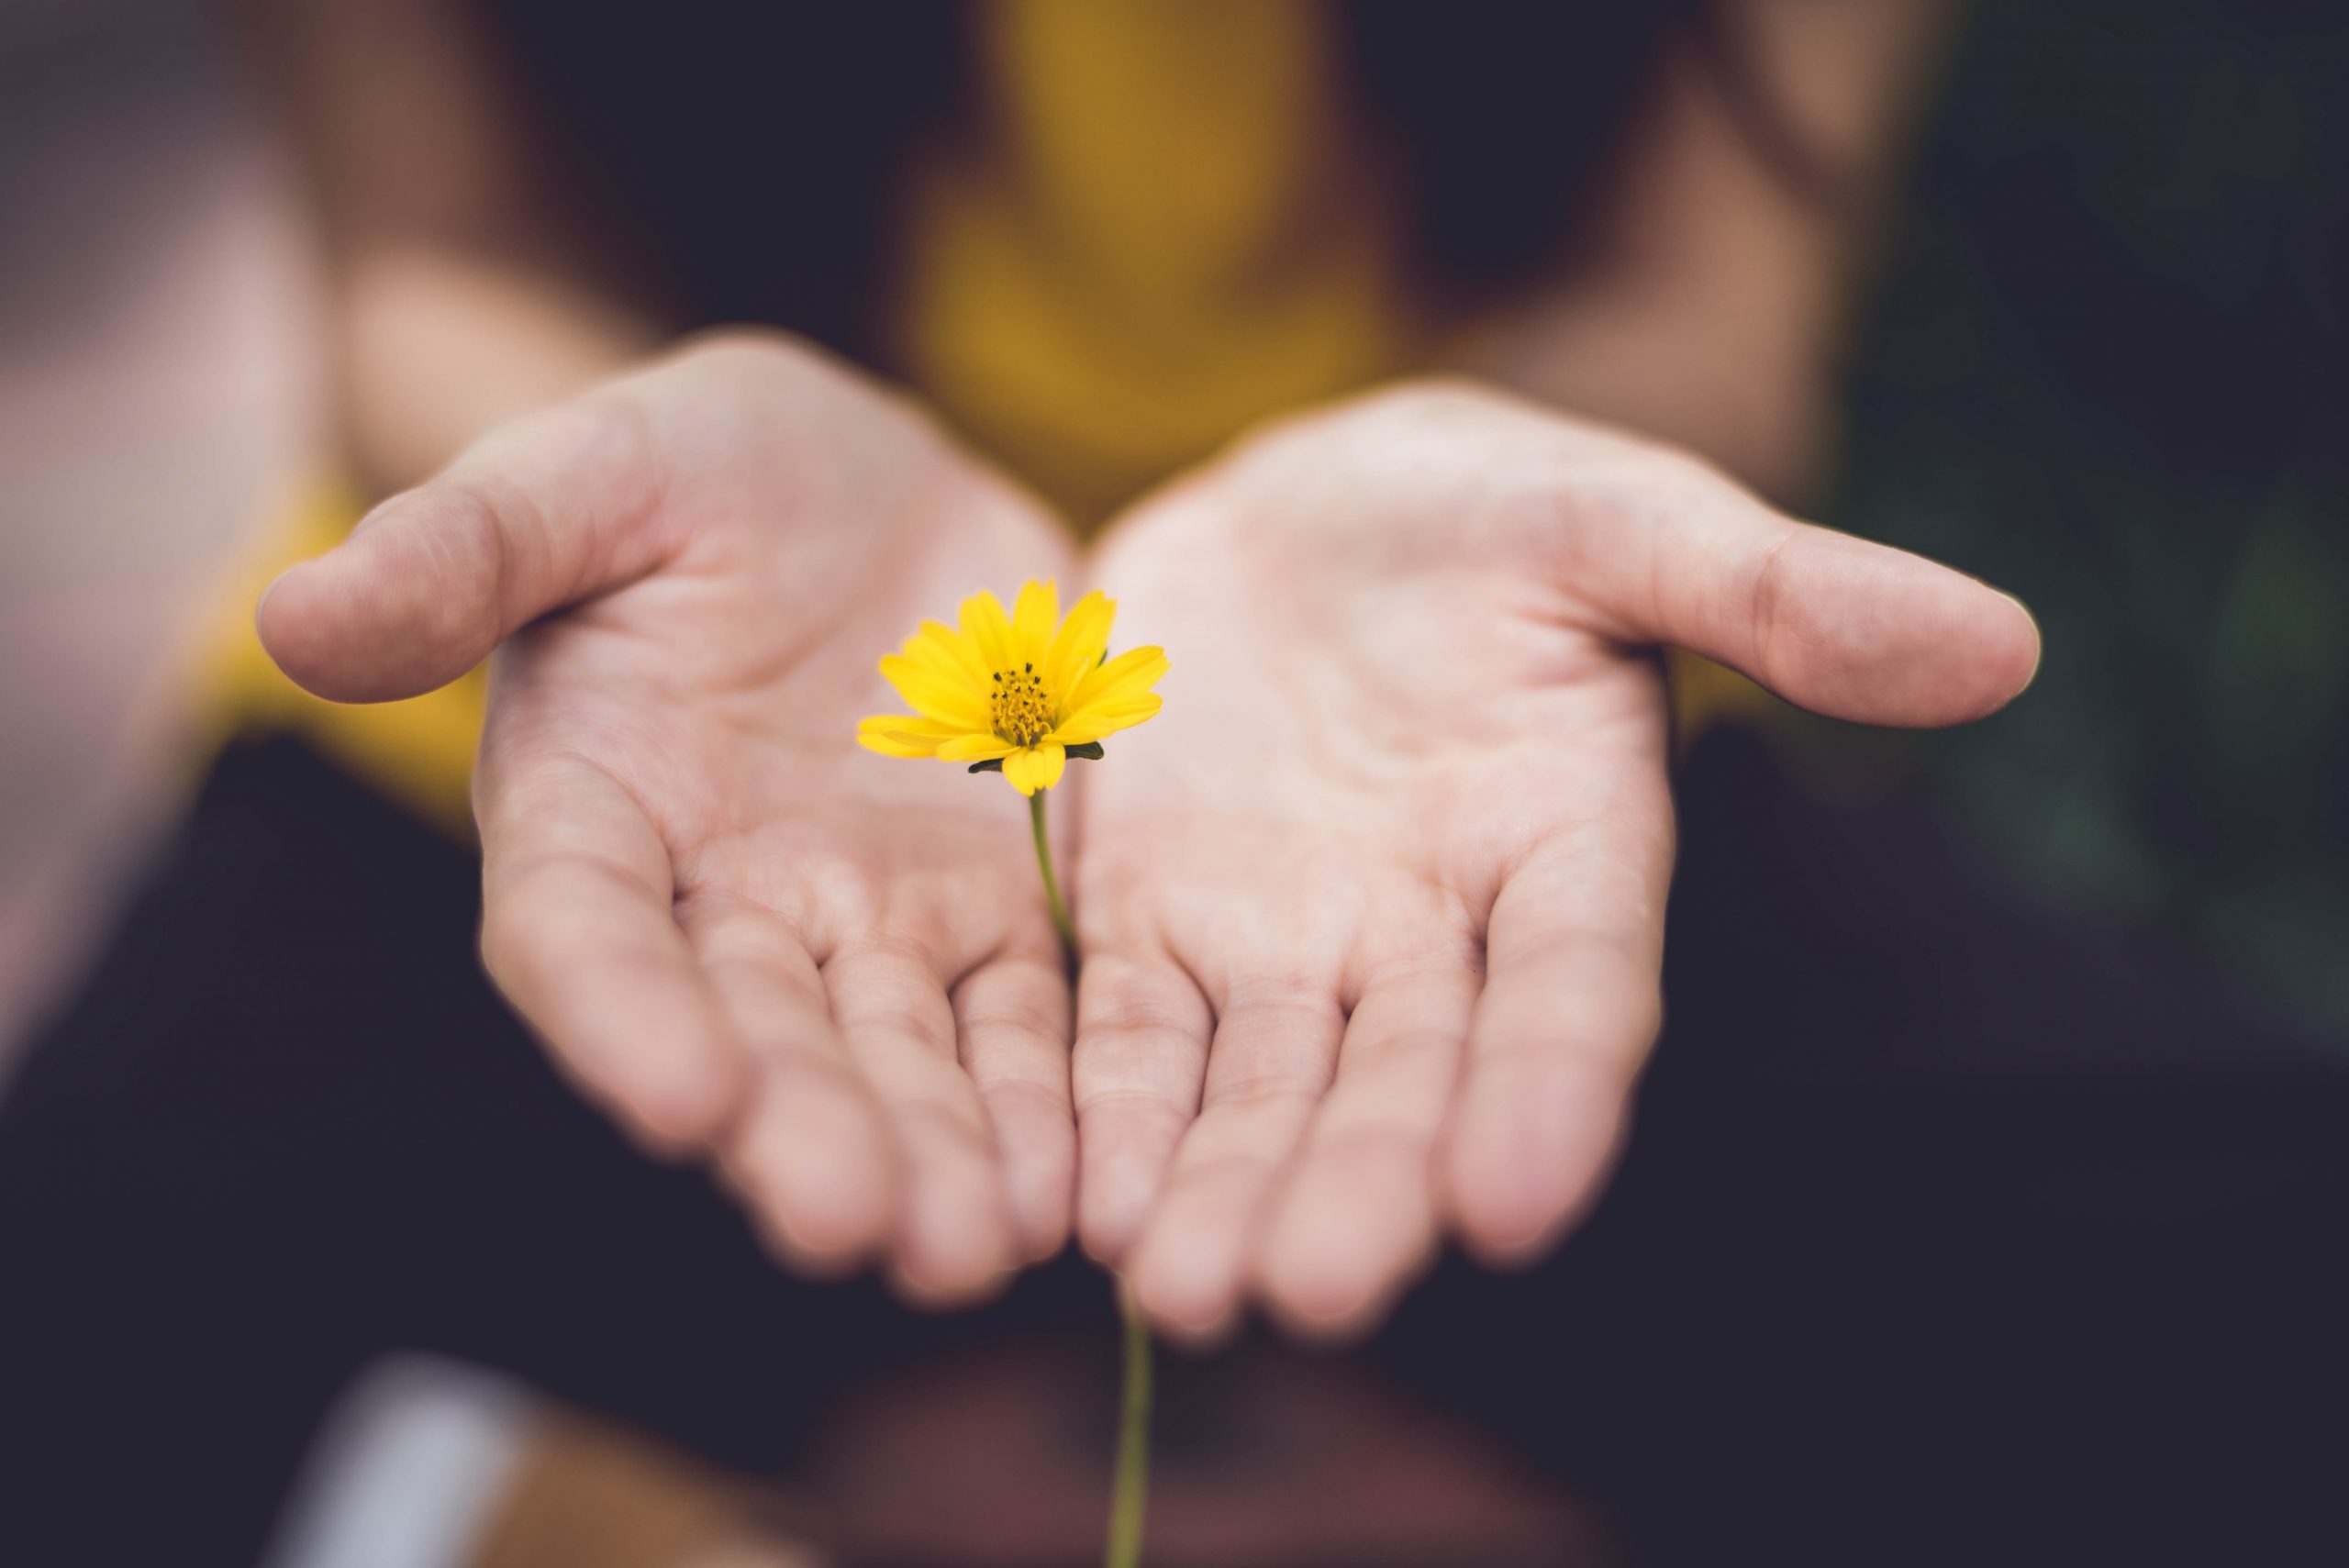 Small yellow flower in hands